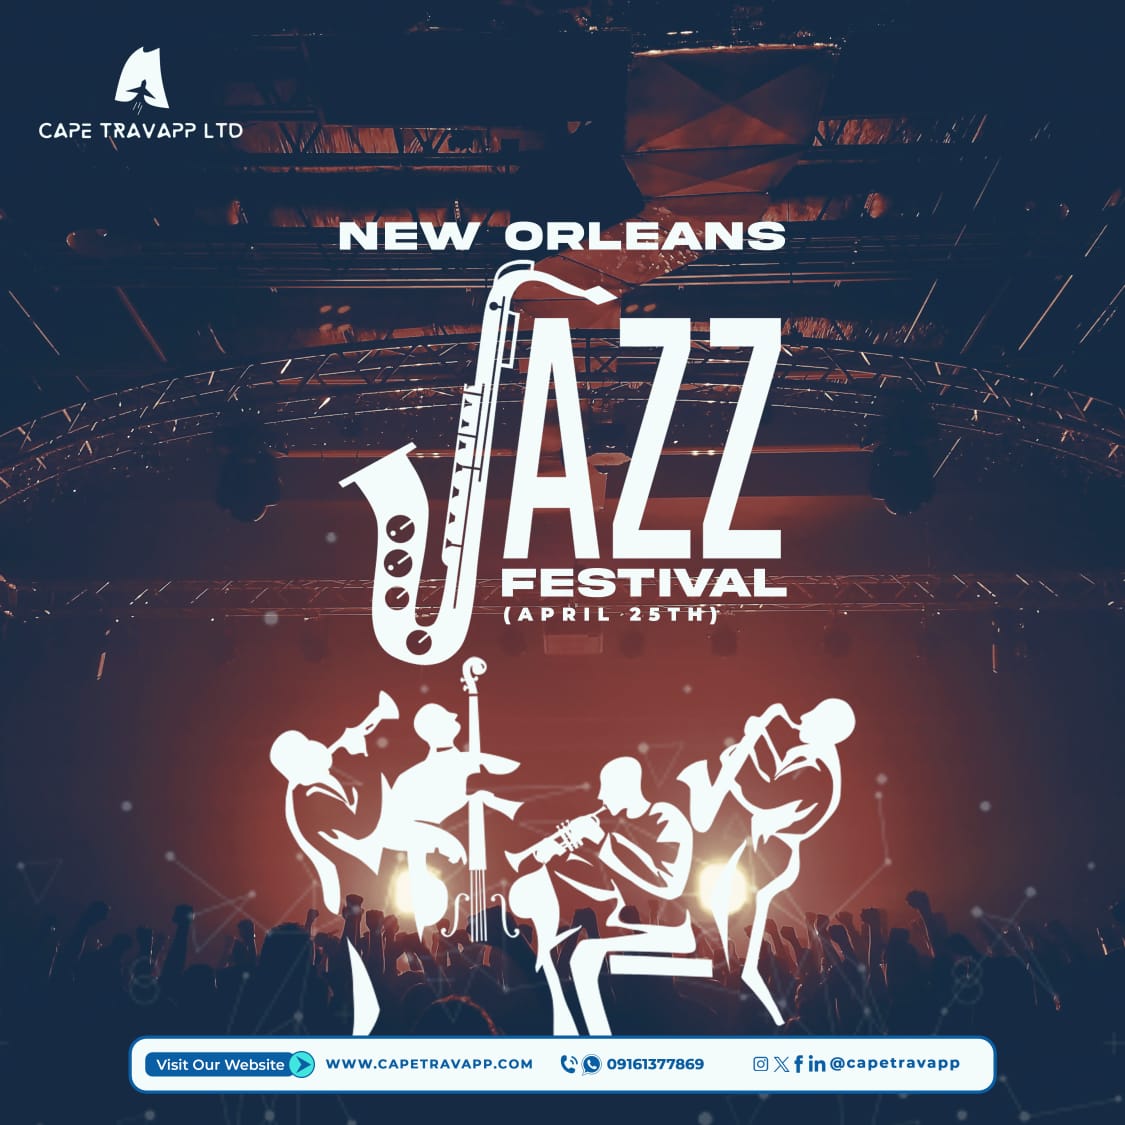 Feel the rhythm and soul of the New Orleans Jazz Festival today! 🎶🎷 

#NOLAJazzFest #musicmagic
#explorefrance #francetravels #paris #louvre #capetravels #capetravapp #packages #travel #instatravel #holiday #holidayfun #vacation #trip #tourism #group #destinationearth